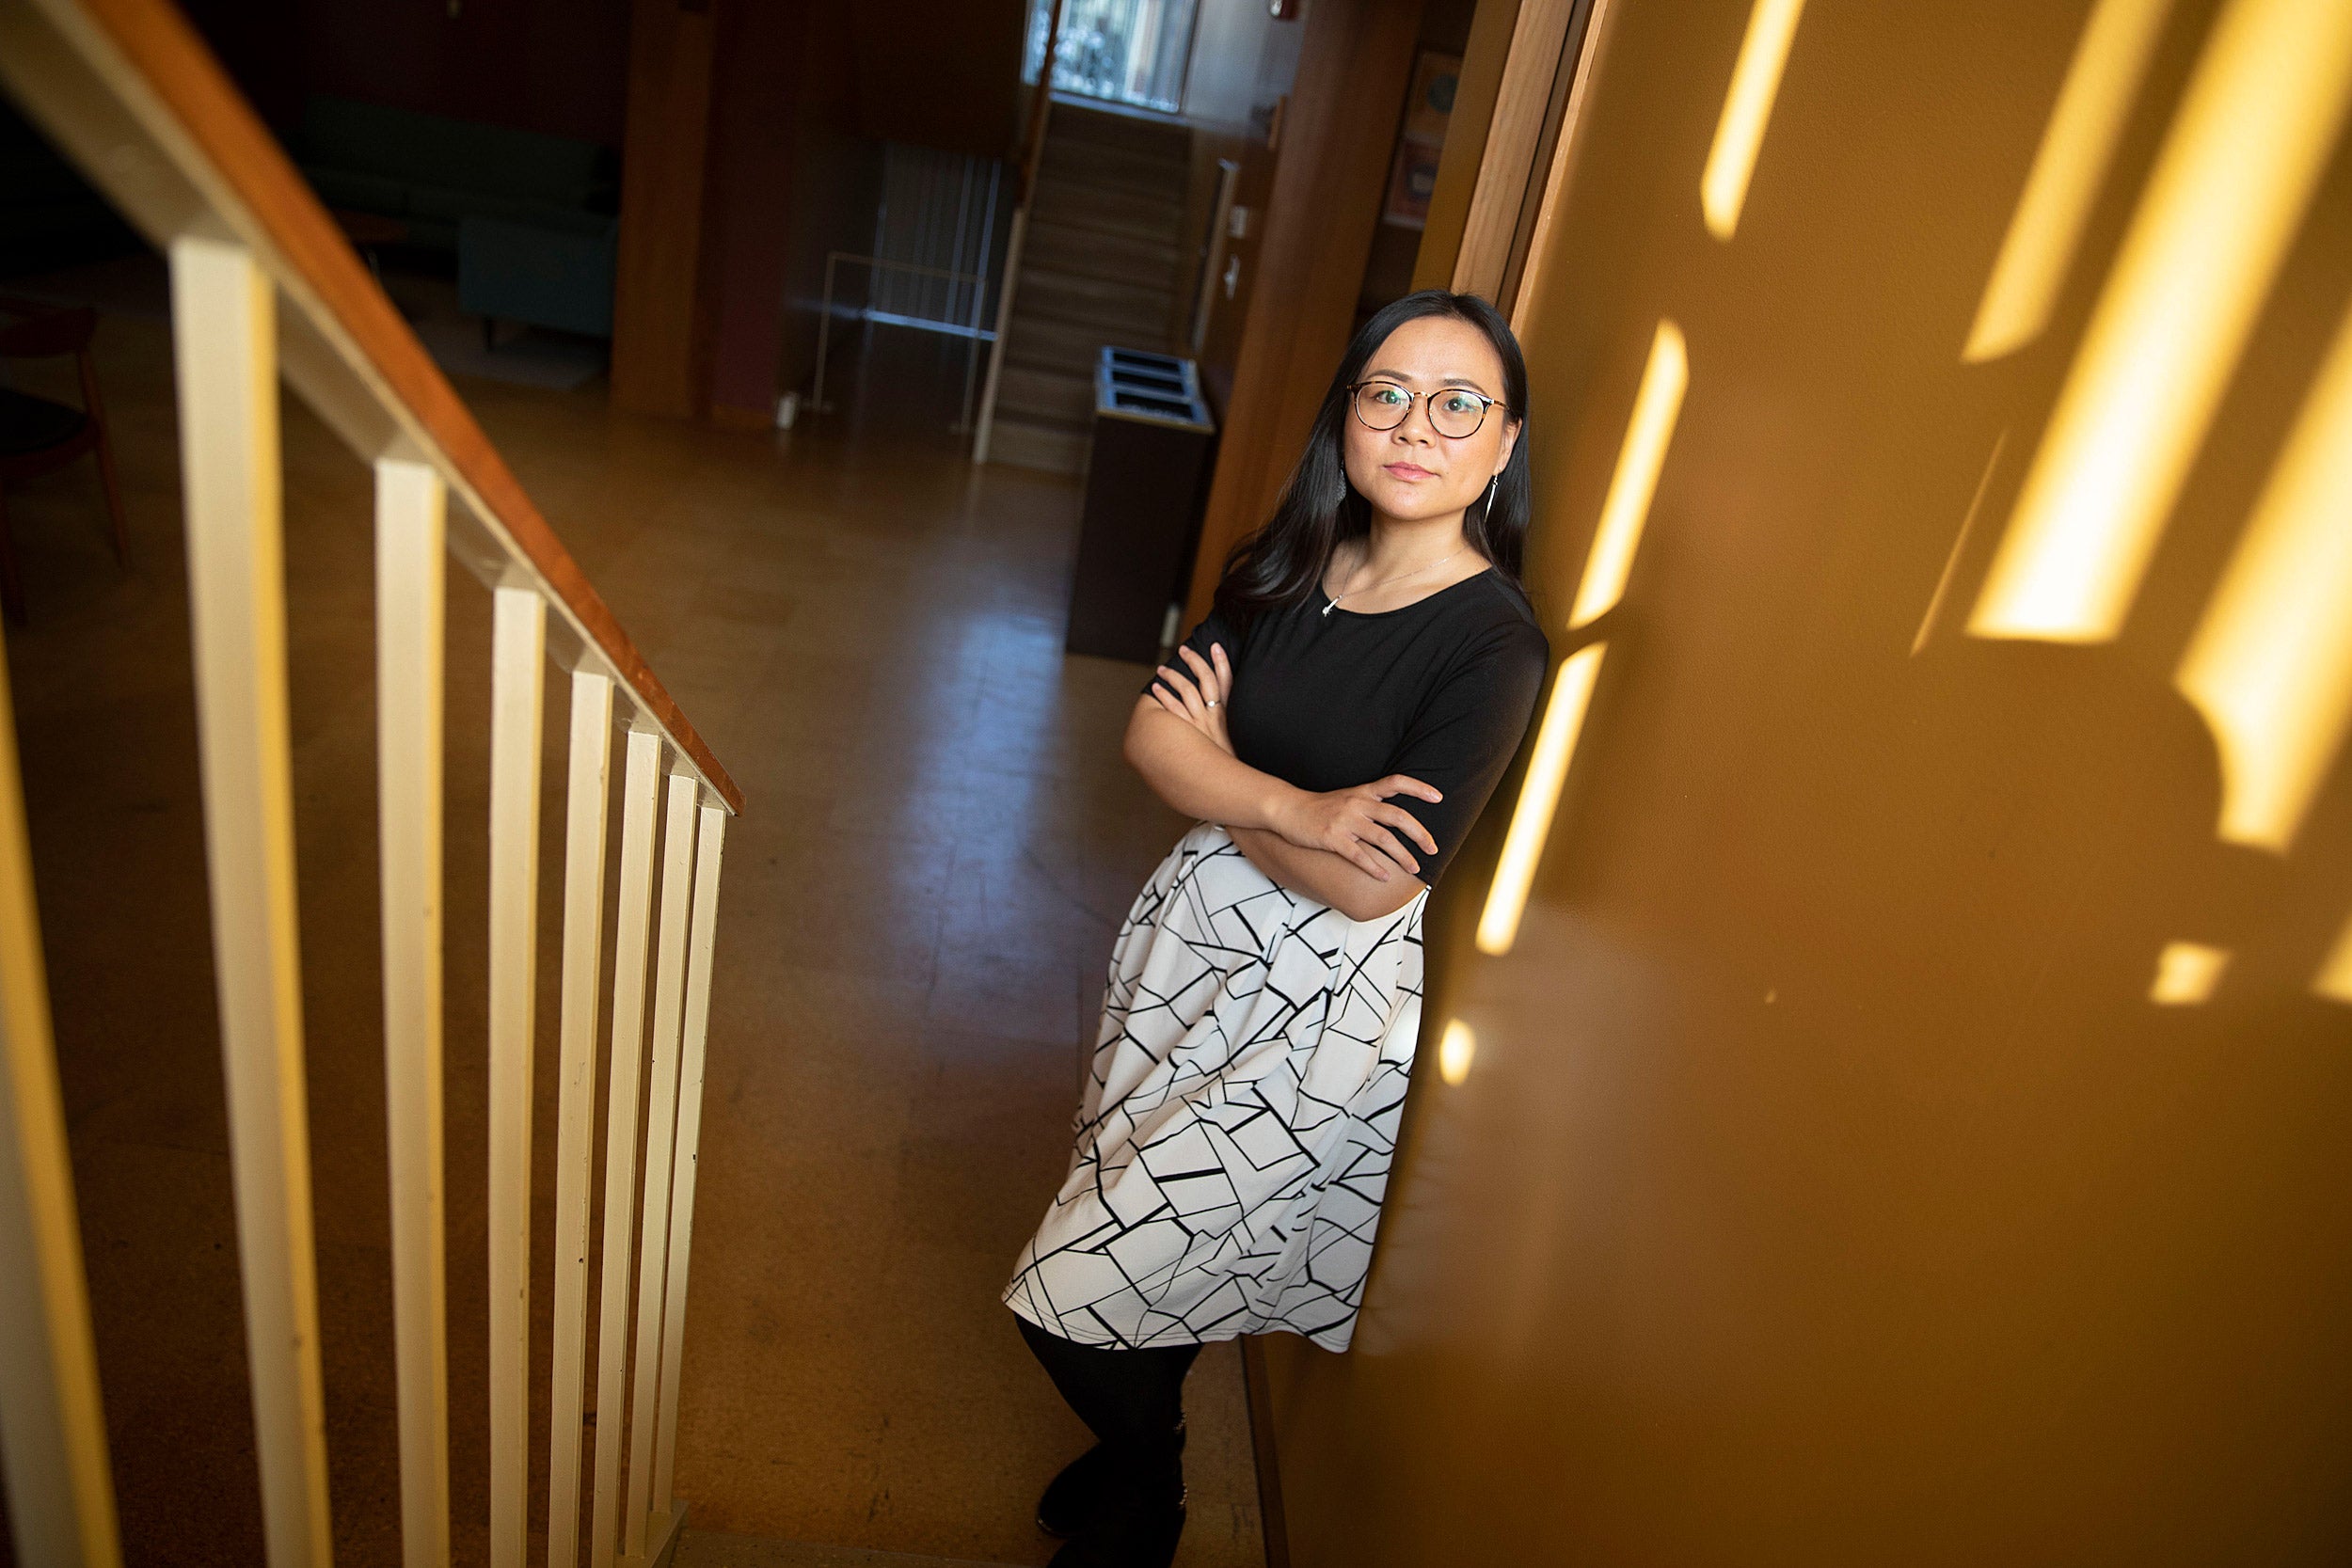 Asian woman standing in stairwell.